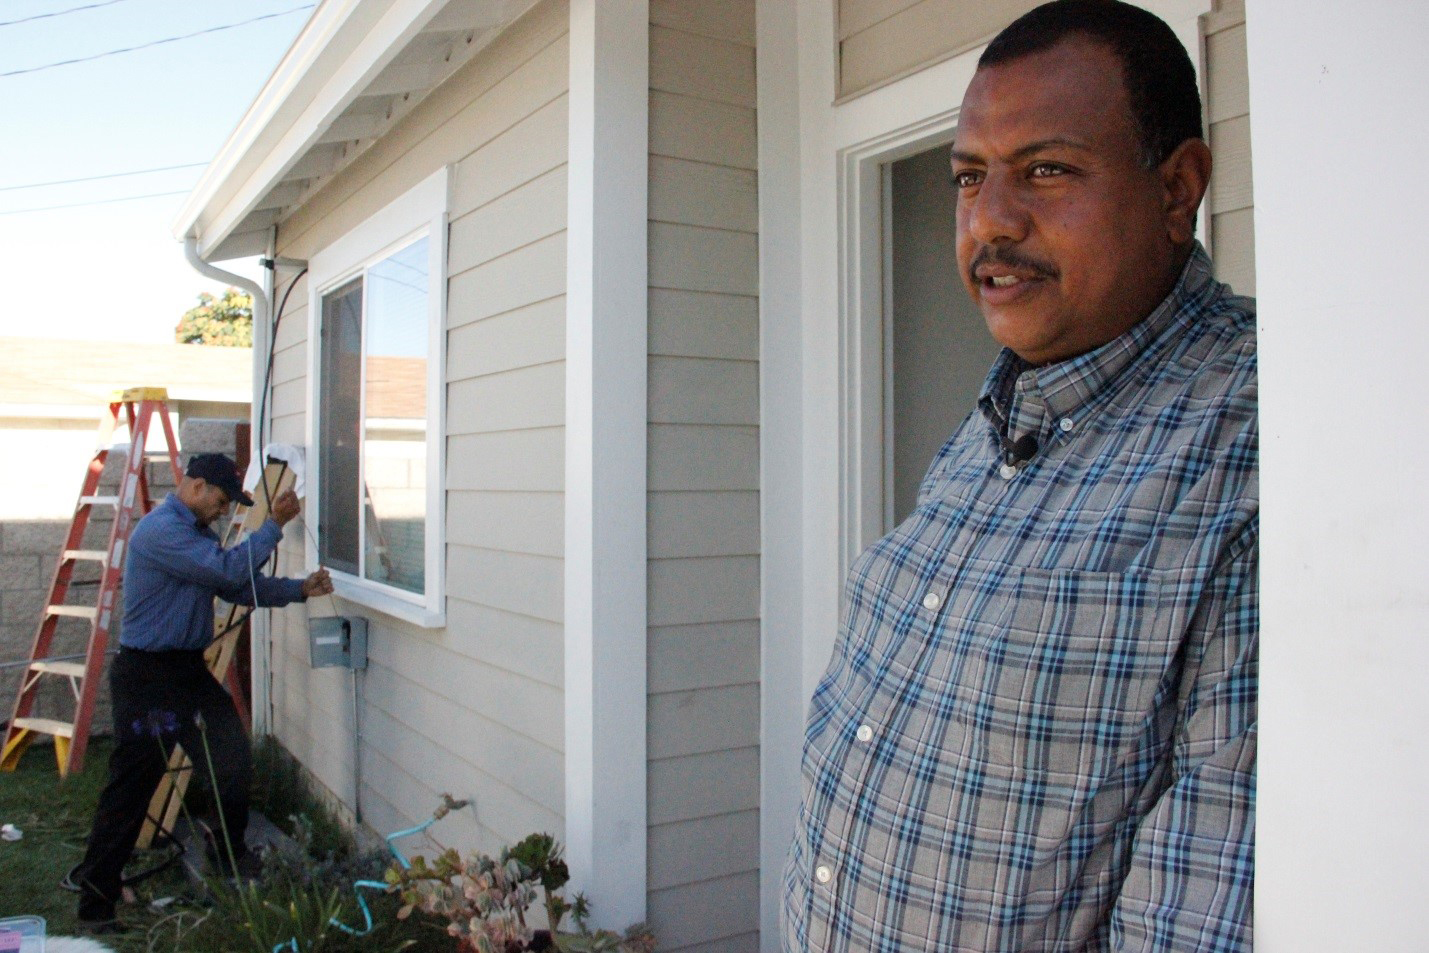 Habitat for Humanity homeowner Girmachew stands in the doorway of his Los Angeles home as a technician from Kahn Air installs a Carrier ductless home comfort system in his home. More than 150 Carrier ductless systems are being installed in Los Angeles as part of a donation of more than 500 systems donation to Habitat for Humanity this year.